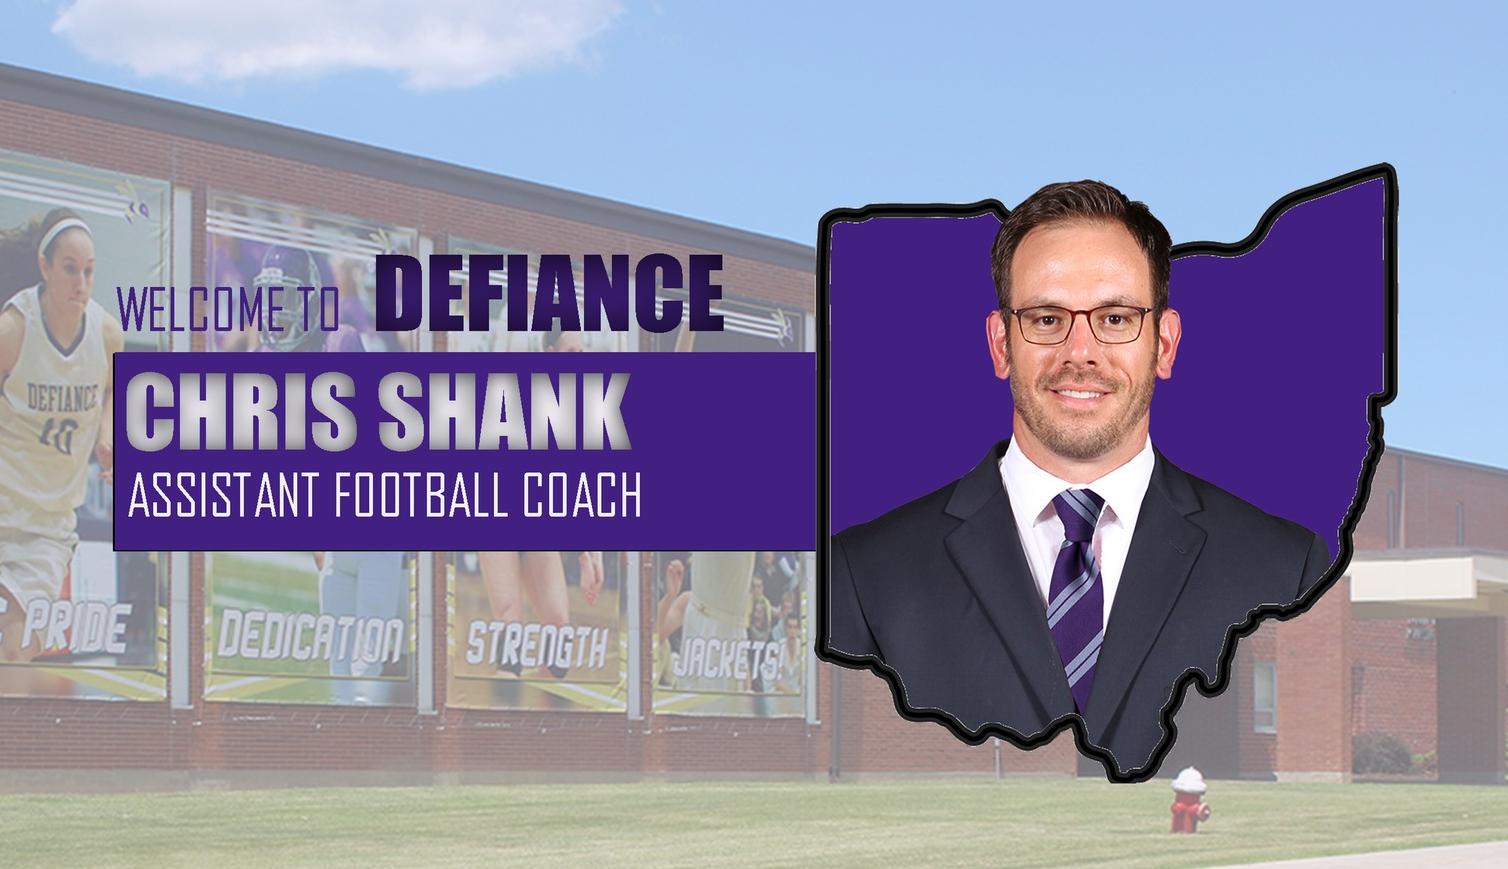 Defiance Welcomes Chris Shank to Coaching Staff